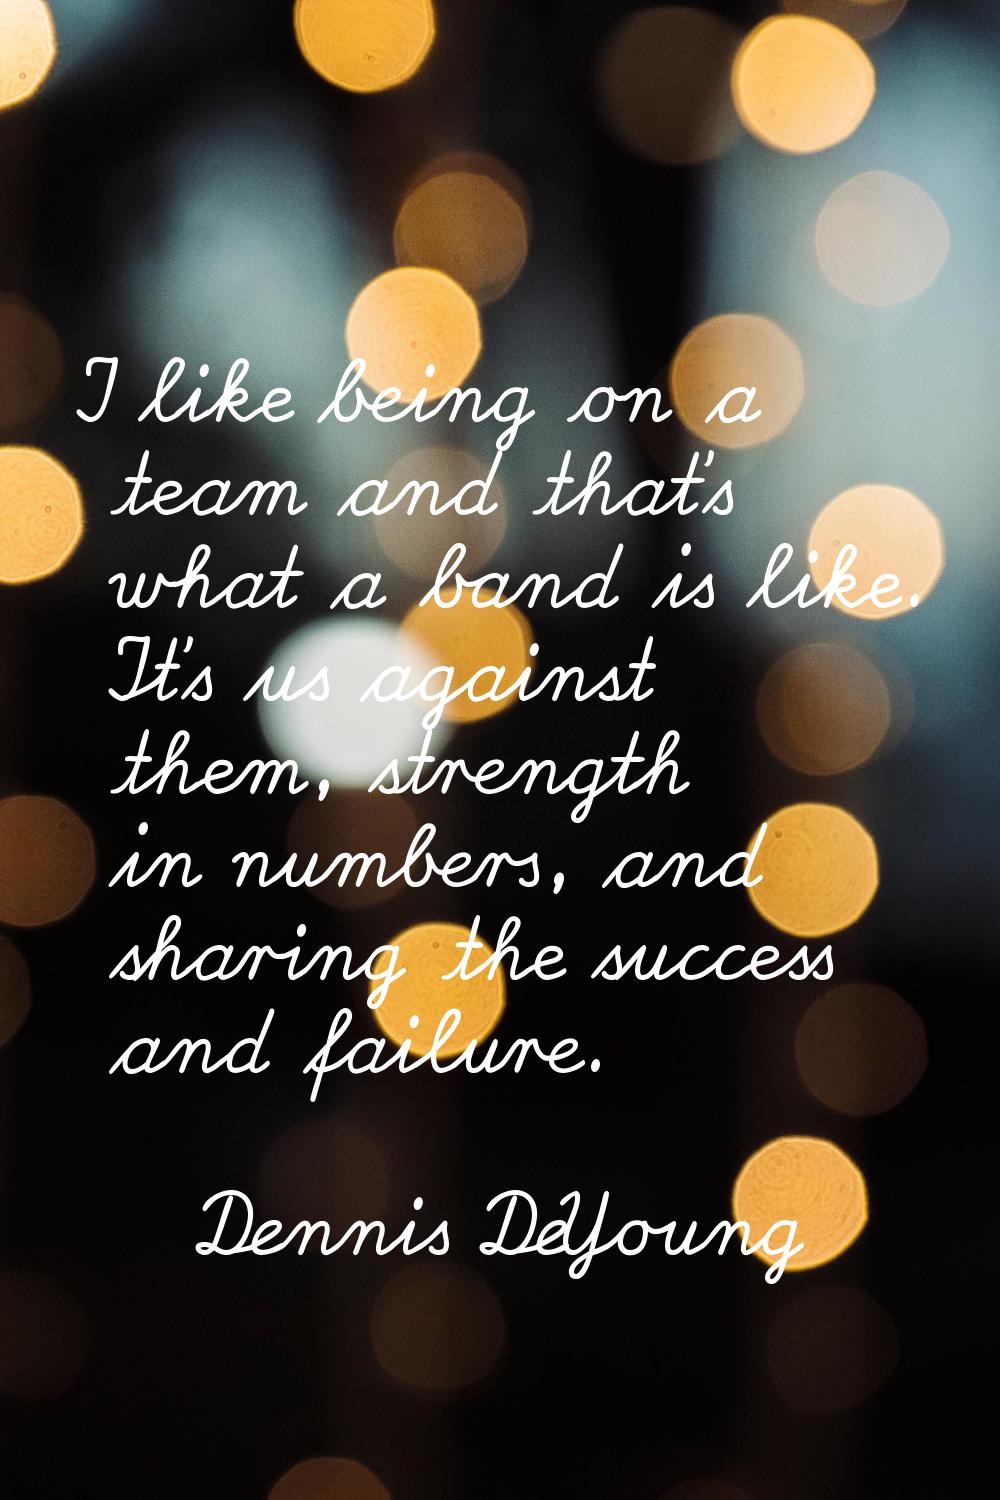 I like being on a team and that's what a band is like. It's us against them, strength in numbers, a